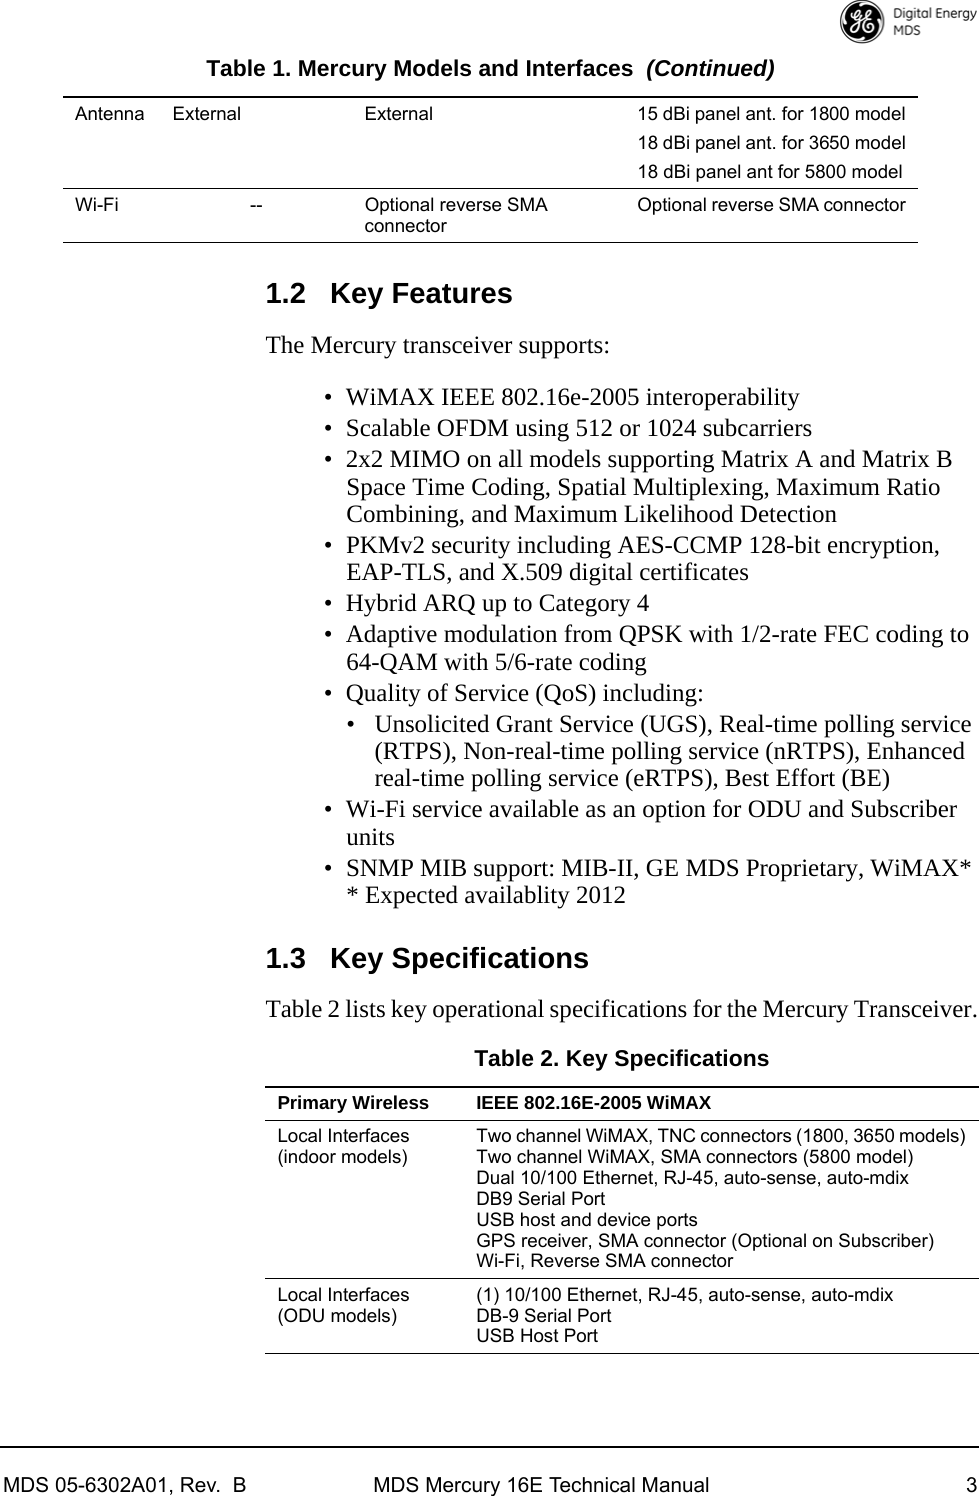 MDS 05-6302A01, Rev.  B MDS Mercury 16E Technical Manual 31.2 Key FeaturesThe Mercury transceiver supports:• WiMAX IEEE 802.16e-2005 interoperability• Scalable OFDM using 512 or 1024 subcarriers• 2x2 MIMO on all models supporting Matrix A and Matrix B Space Time Coding, Spatial Multiplexing, Maximum Ratio Combining, and Maximum Likelihood Detection• PKMv2 security including AES-CCMP 128-bit encryption, EAP-TLS, and X.509 digital certificates• Hybrid ARQ up to Category 4• Adaptive modulation from QPSK with 1/2-rate FEC coding to 64-QAM with 5/6-rate coding• Quality of Service (QoS) including:• Unsolicited Grant Service (UGS), Real-time polling service (RTPS), Non-real-time polling service (nRTPS), Enhanced real-time polling service (eRTPS), Best Effort (BE)• Wi-Fi service available as an option for ODU and Subscriber units • SNMP MIB support: MIB-II, GE MDS Proprietary, WiMAX* * Expected availablity 20121.3 Key SpecificationsTable 2 lists key operational specifications for the Mercury Transceiver.Antenna External External 15 dBi panel ant. for 1800 model18 dBi panel ant. for 3650 model18 dBi panel ant for 5800 modelWi-Fi -- Optional reverse SMA connectorOptional reverse SMA connectorTable 1. Mercury Models and Interfaces (Continued)Table 2. Key SpecificationsPrimary Wireless IEEE 802.16E-2005 WiMAXLocal Interfaces(indoor models)Two channel WiMAX, TNC connectors (1800, 3650 models)Two channel WiMAX, SMA connectors (5800 model)Dual 10/100 Ethernet, RJ-45, auto-sense, auto-mdixDB9 Serial PortUSB host and device portsGPS receiver, SMA connector (Optional on Subscriber)Wi-Fi, Reverse SMA connectorLocal Interfaces(ODU models)(1) 10/100 Ethernet, RJ-45, auto-sense, auto-mdixDB-9 Serial PortUSB Host Port